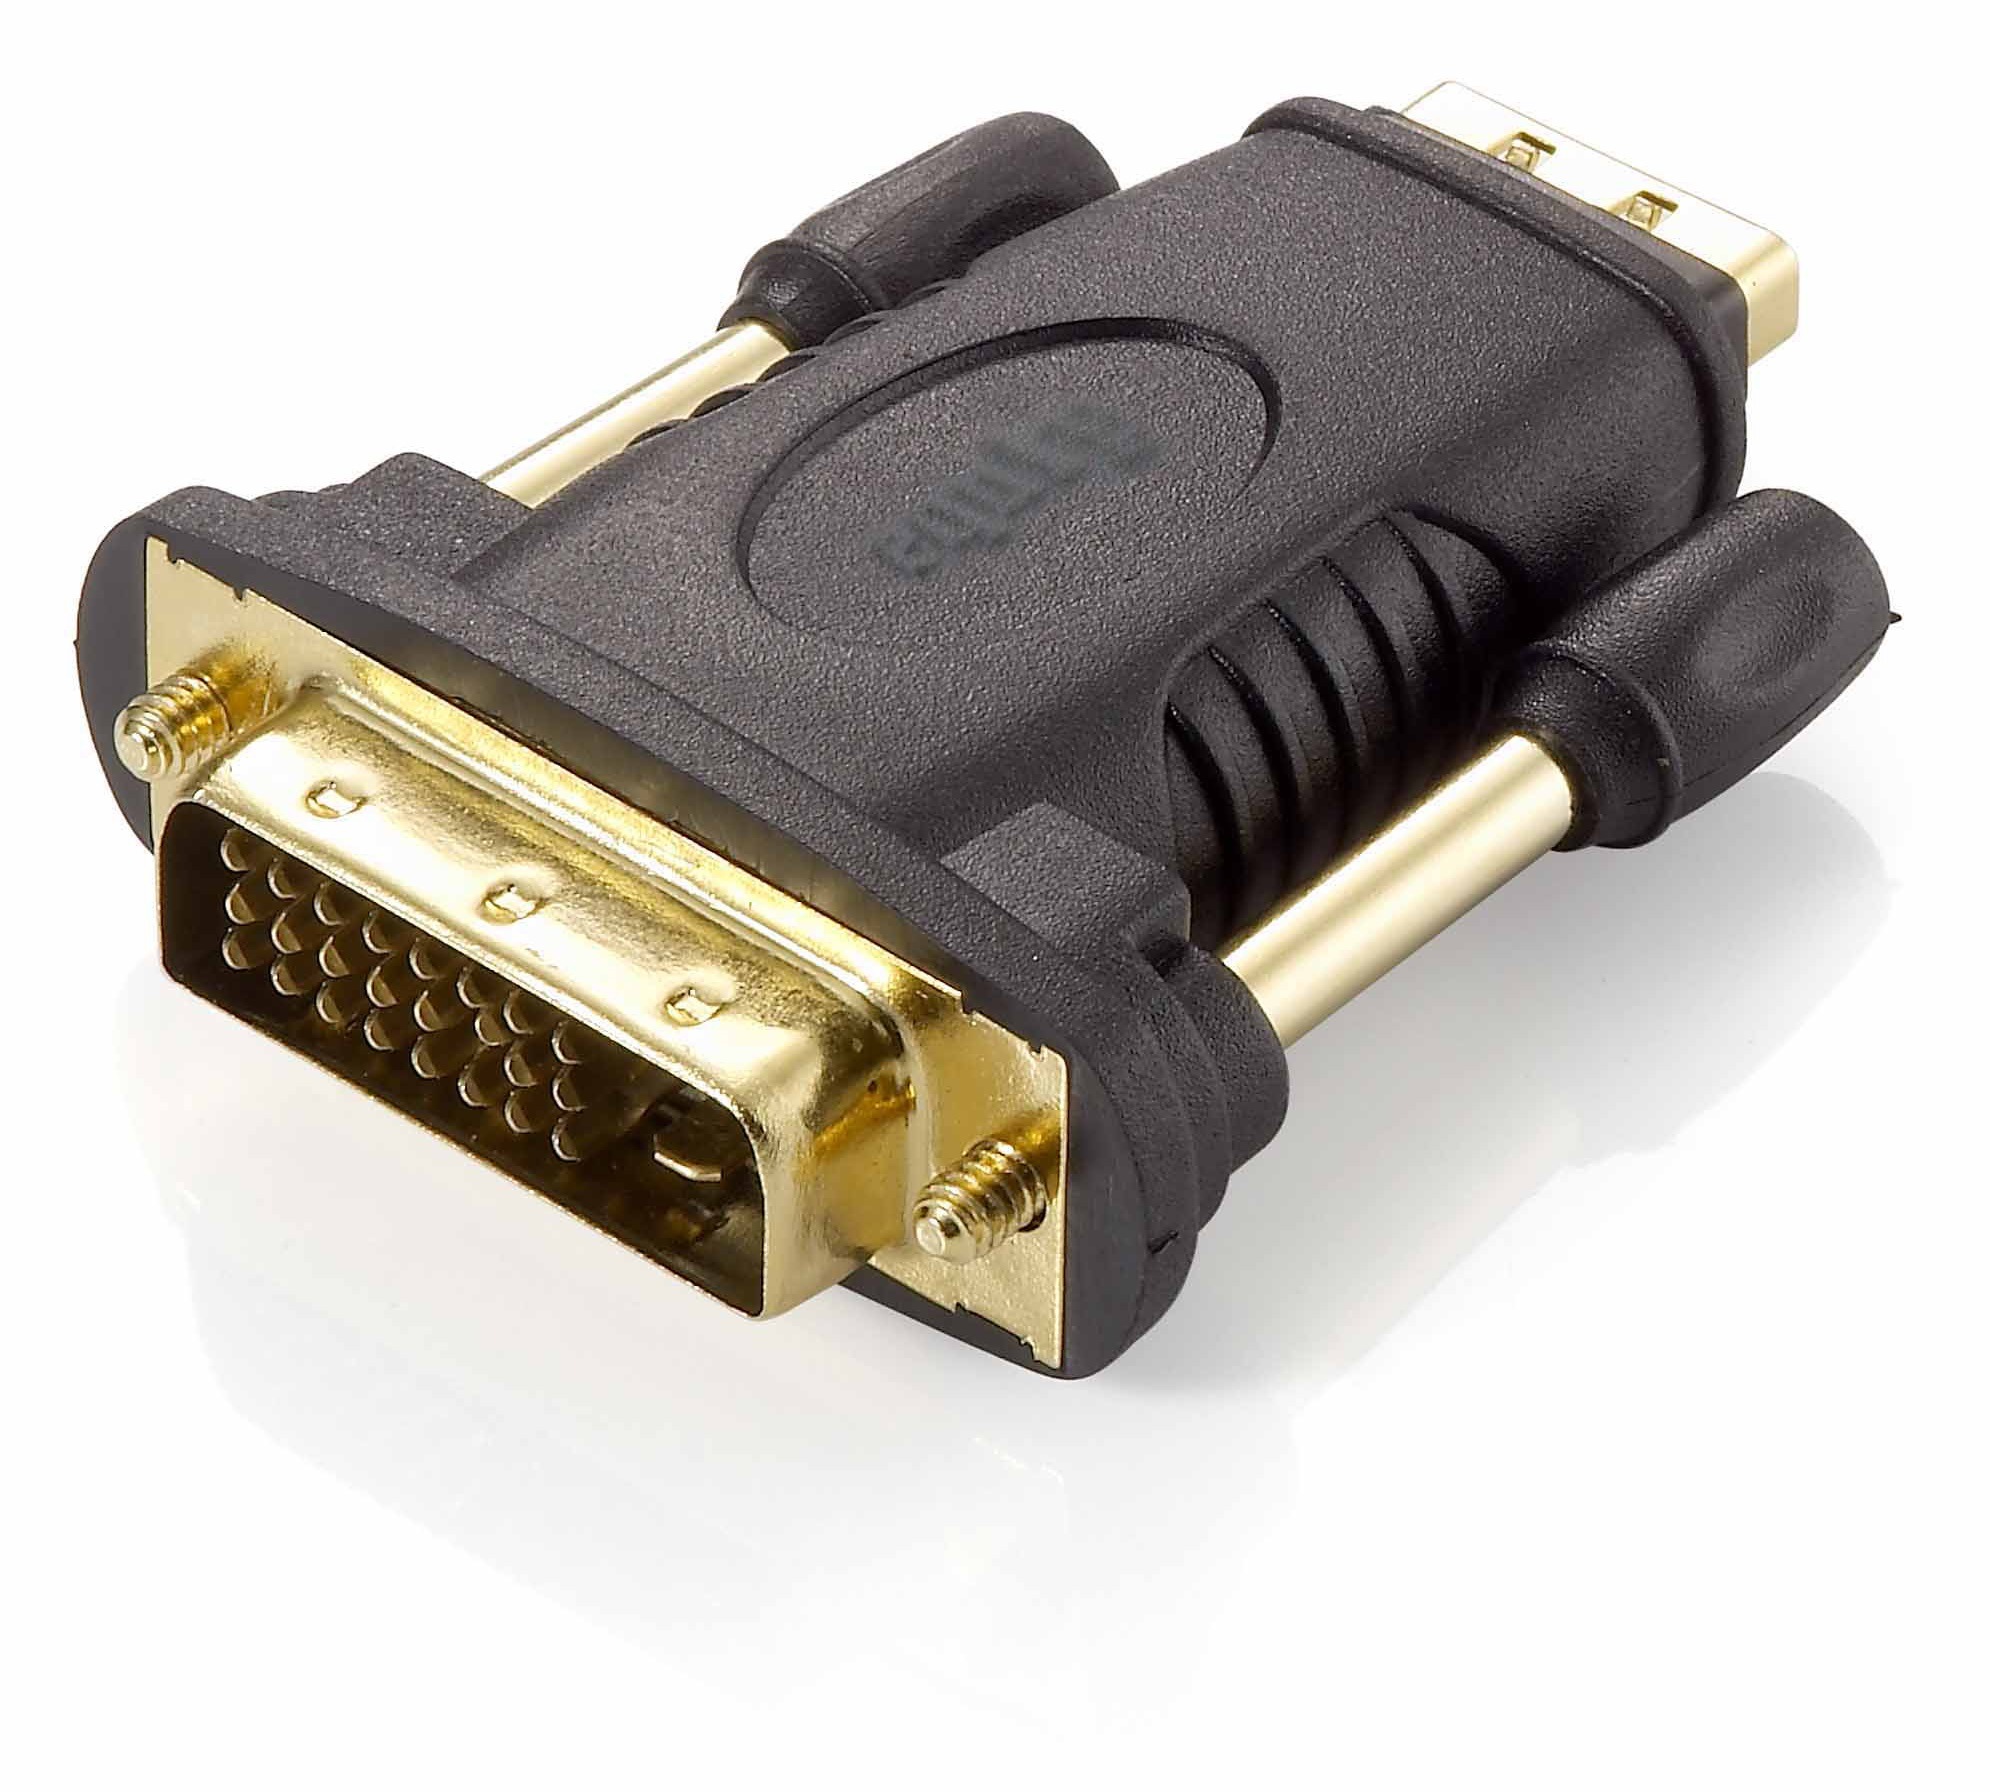 Photos - Cable (video, audio, USB) Equip DVI-D Dual Link to HDMI Adapter 118908 